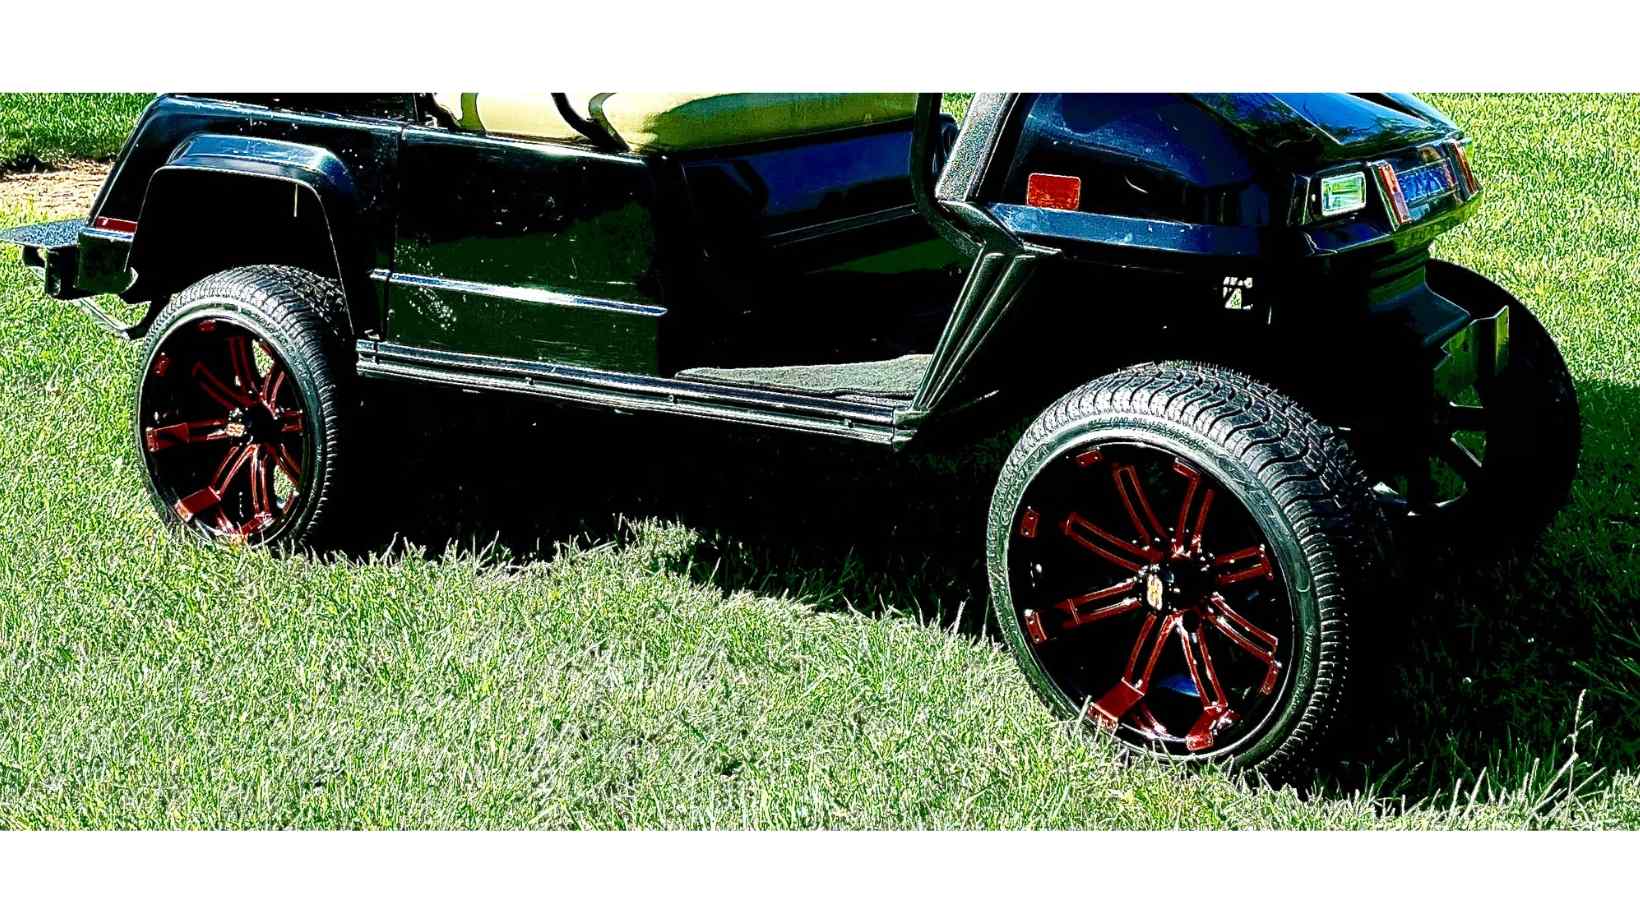 Close up of golf cart wheels and tires